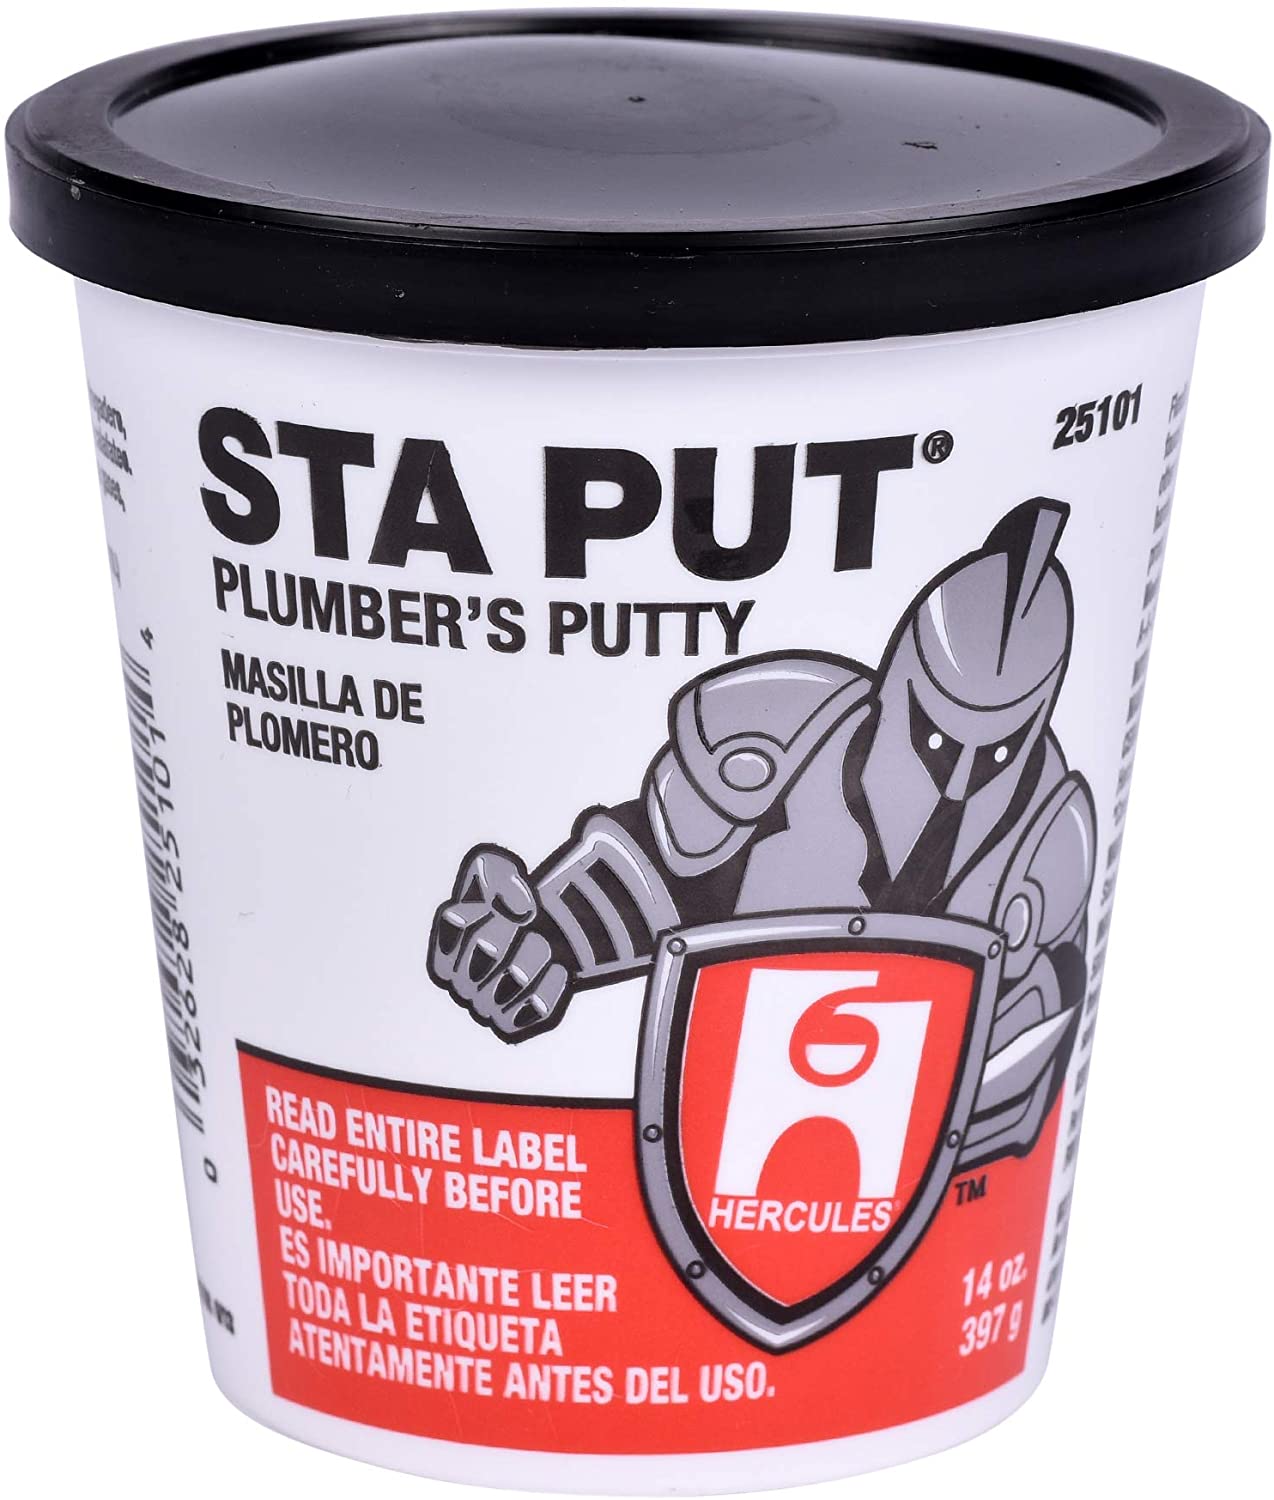 Oatey Hercules Sta Put Plumber's Putty - KM-UHS2-SOON-Quality Home Distribution